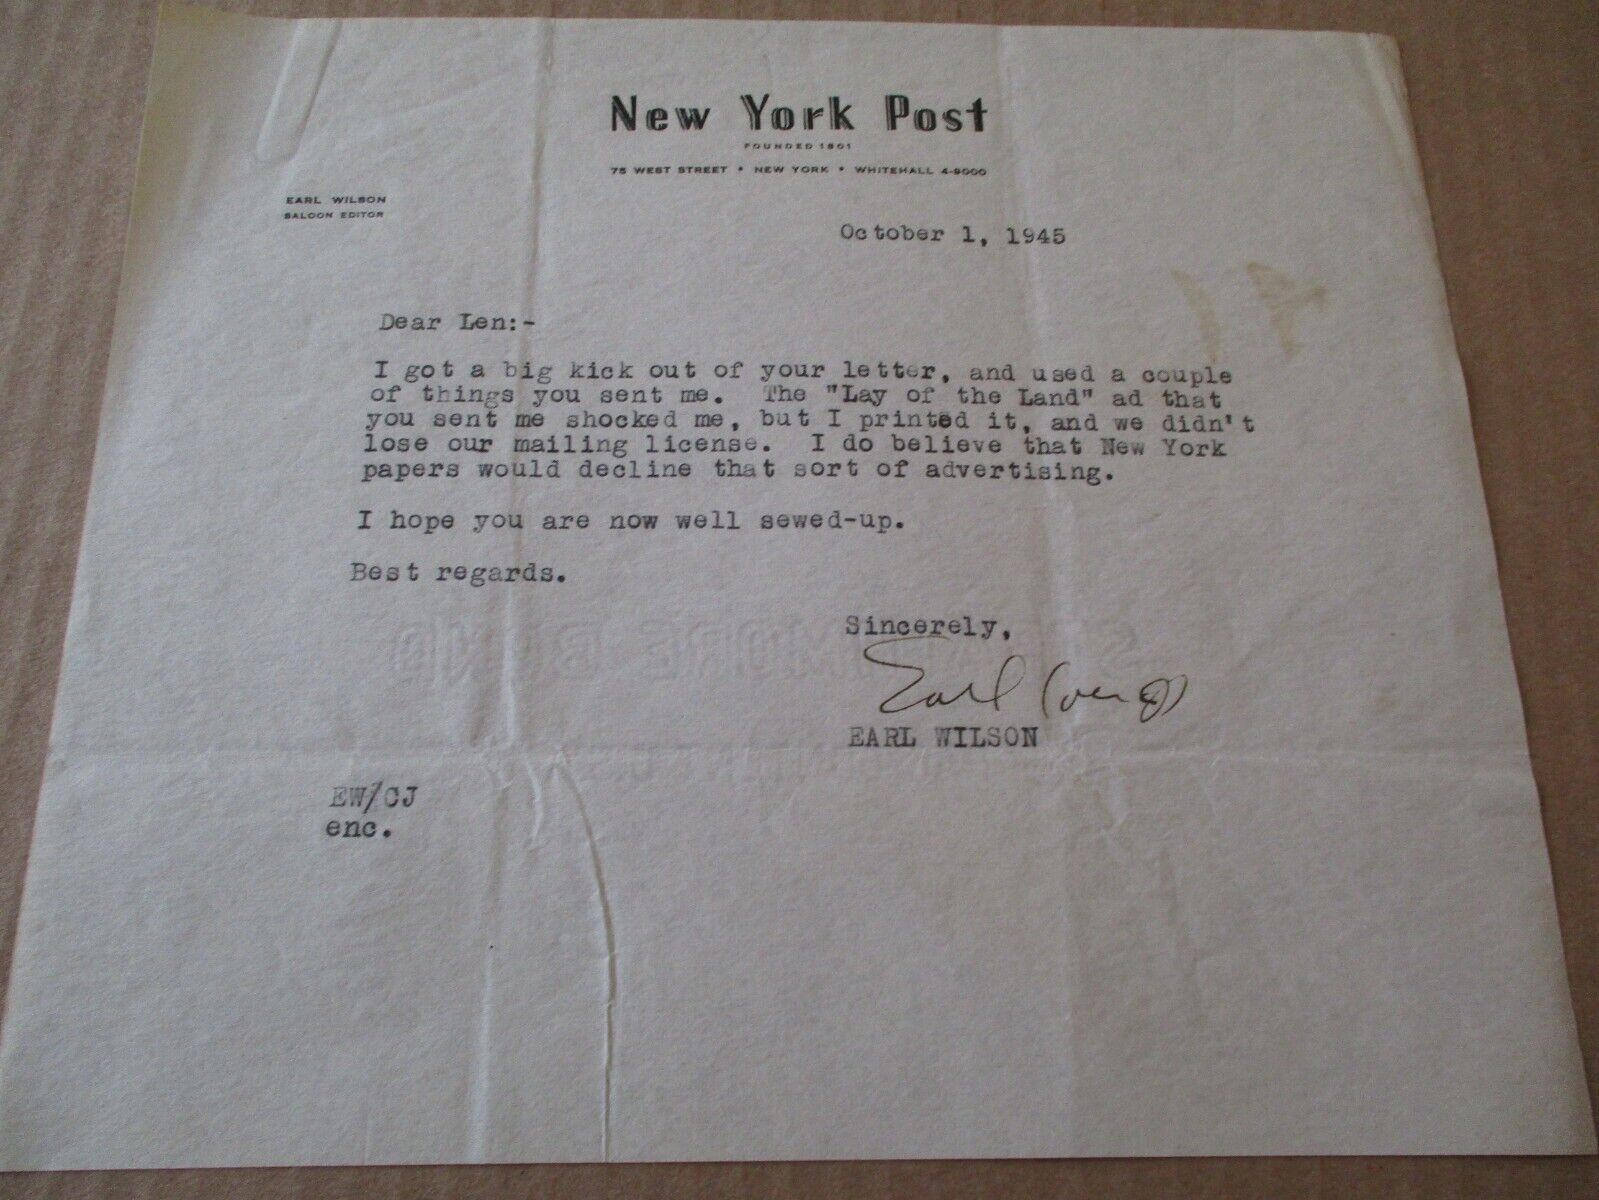 EARL WILSON SIGNED AUTOGRAPH LETTER FAMOUS AMERICAN HISTORIC JOURNALIST 1960'S